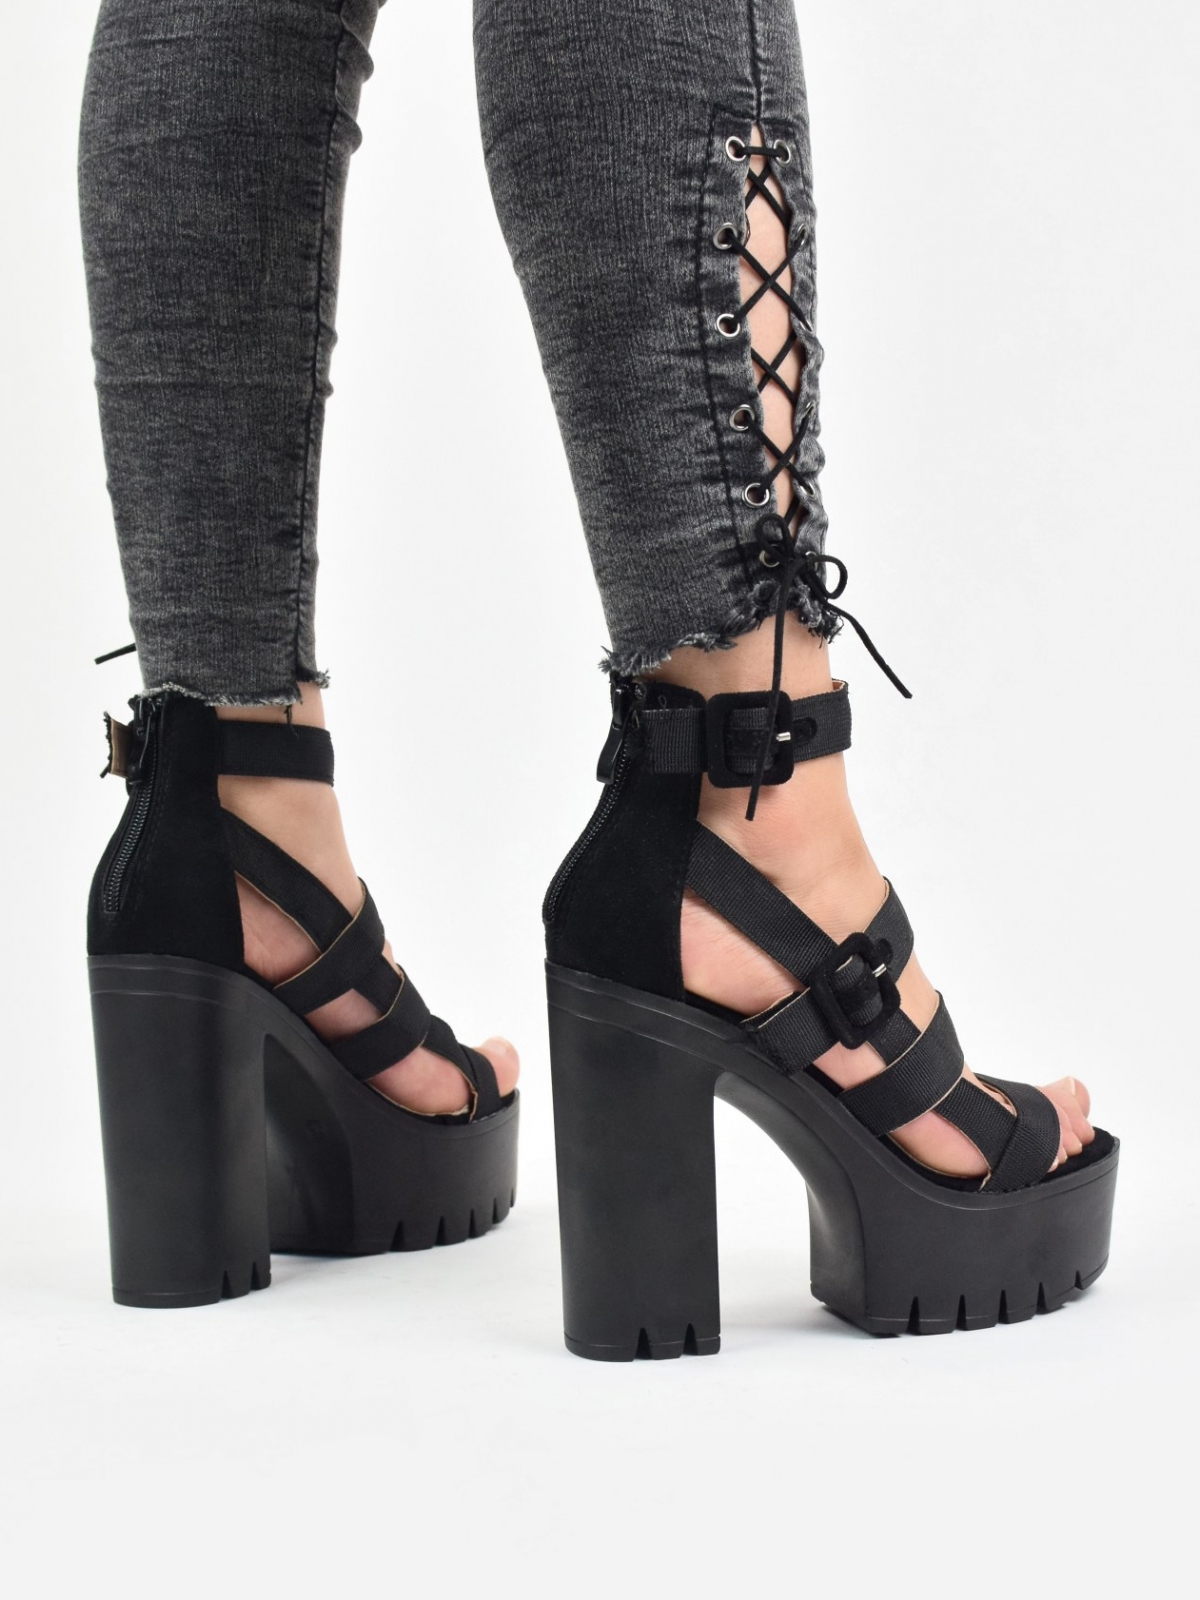 High heeled sandals with fashionable sole in black